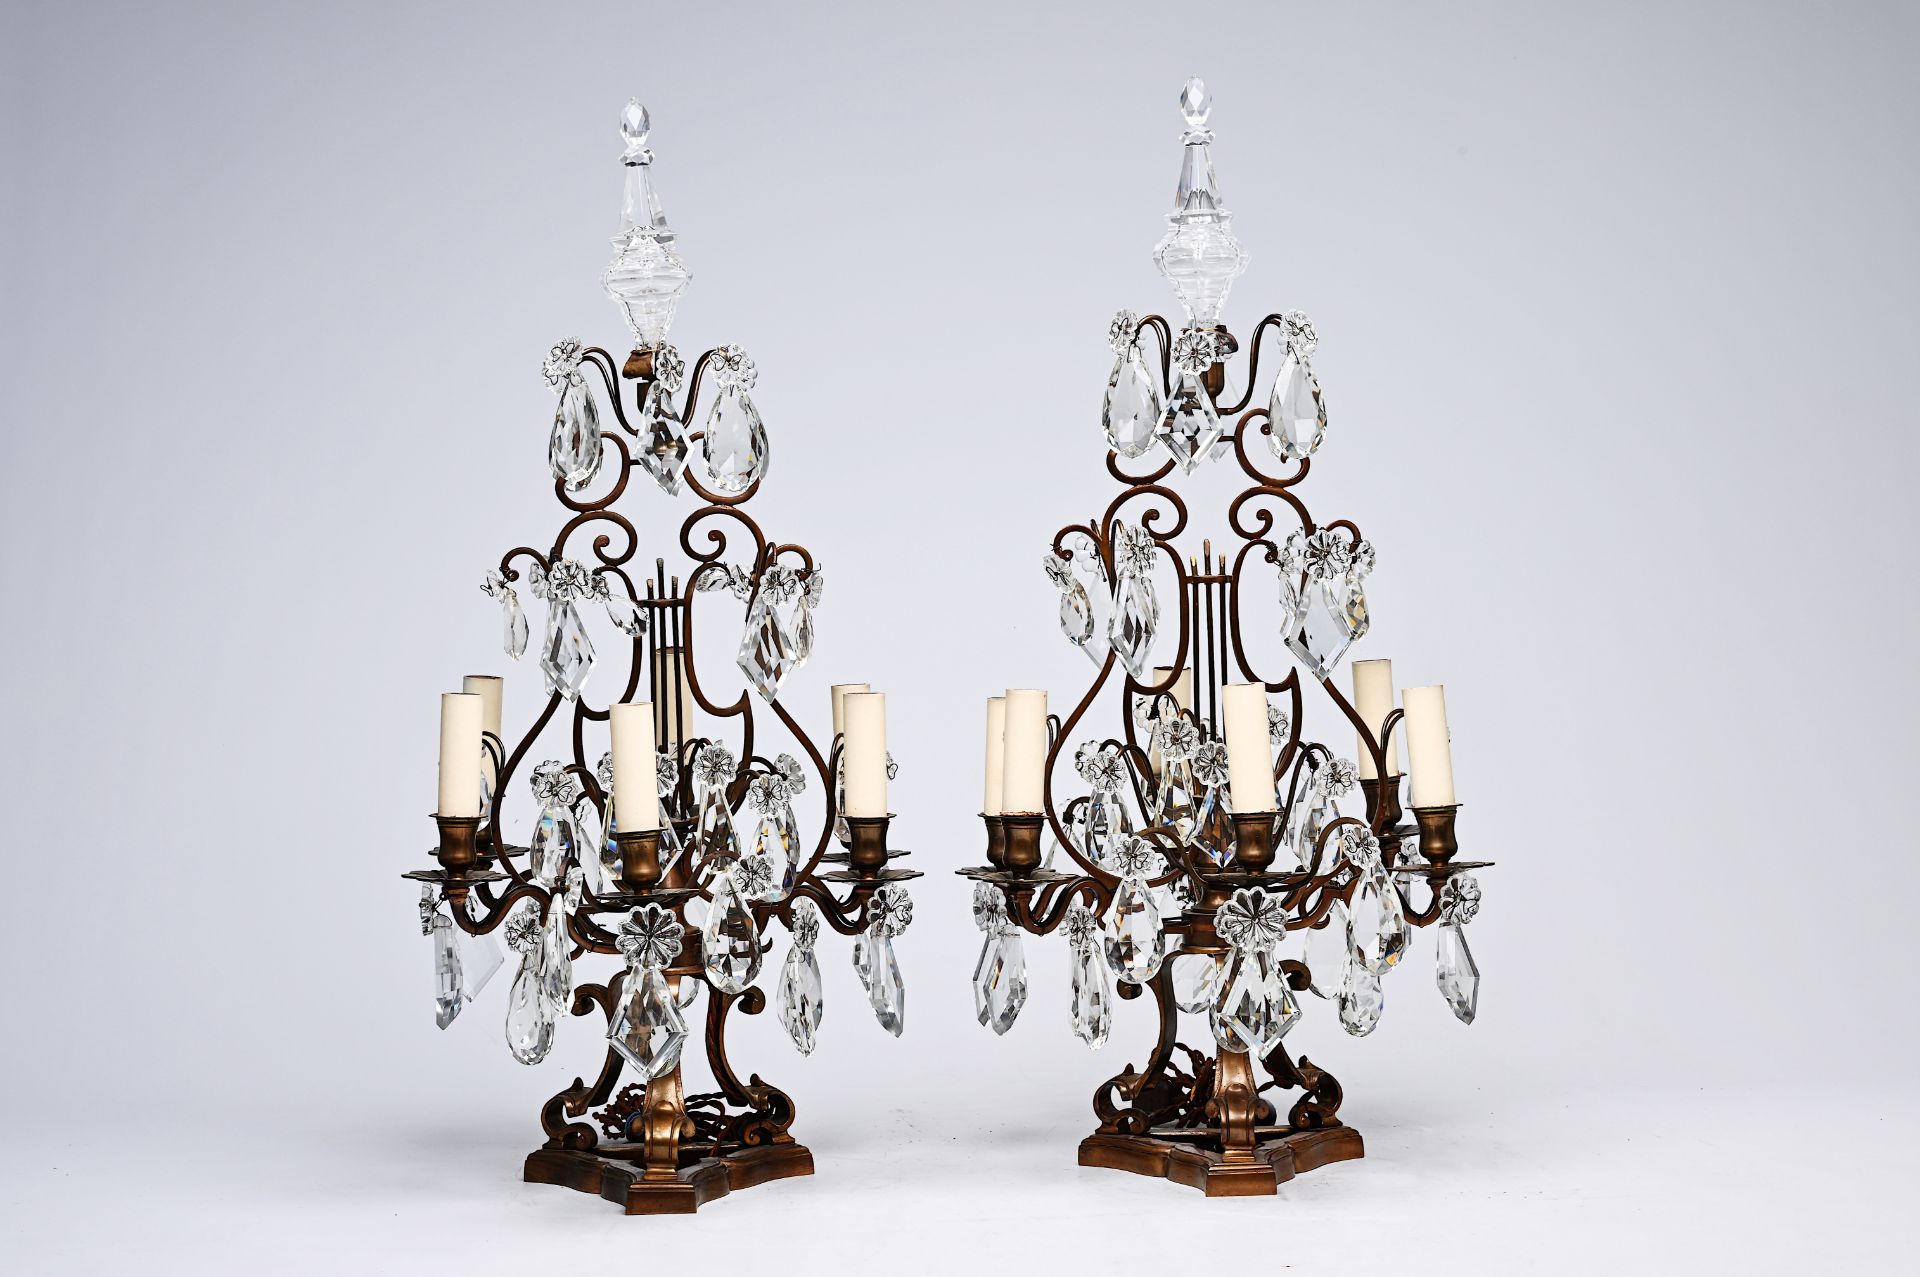 A pair of French Louis XIV style patinated bronze and cut crystal six-lights girandoles, early 20th